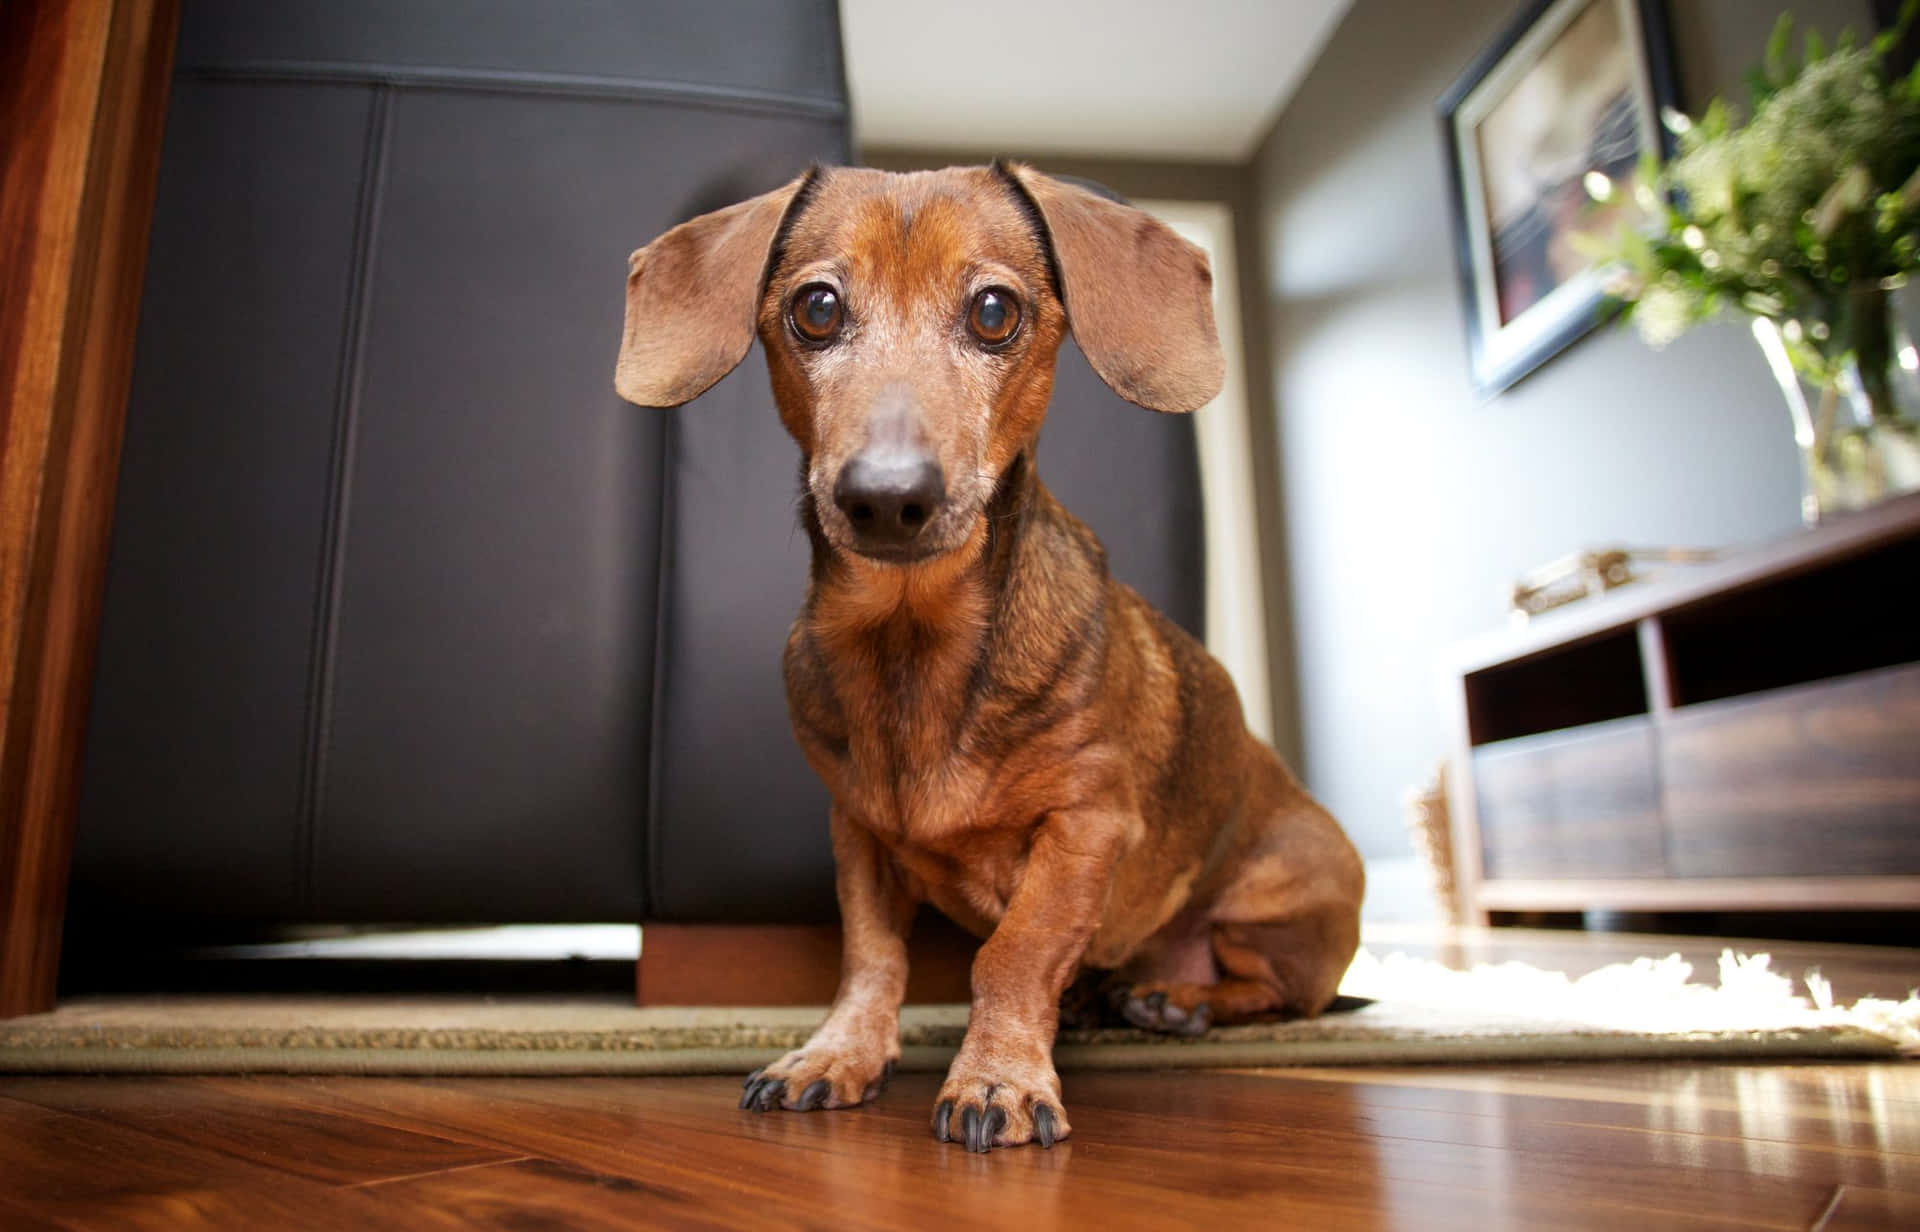 A Brown And Tan Dog Sitting On The Floor